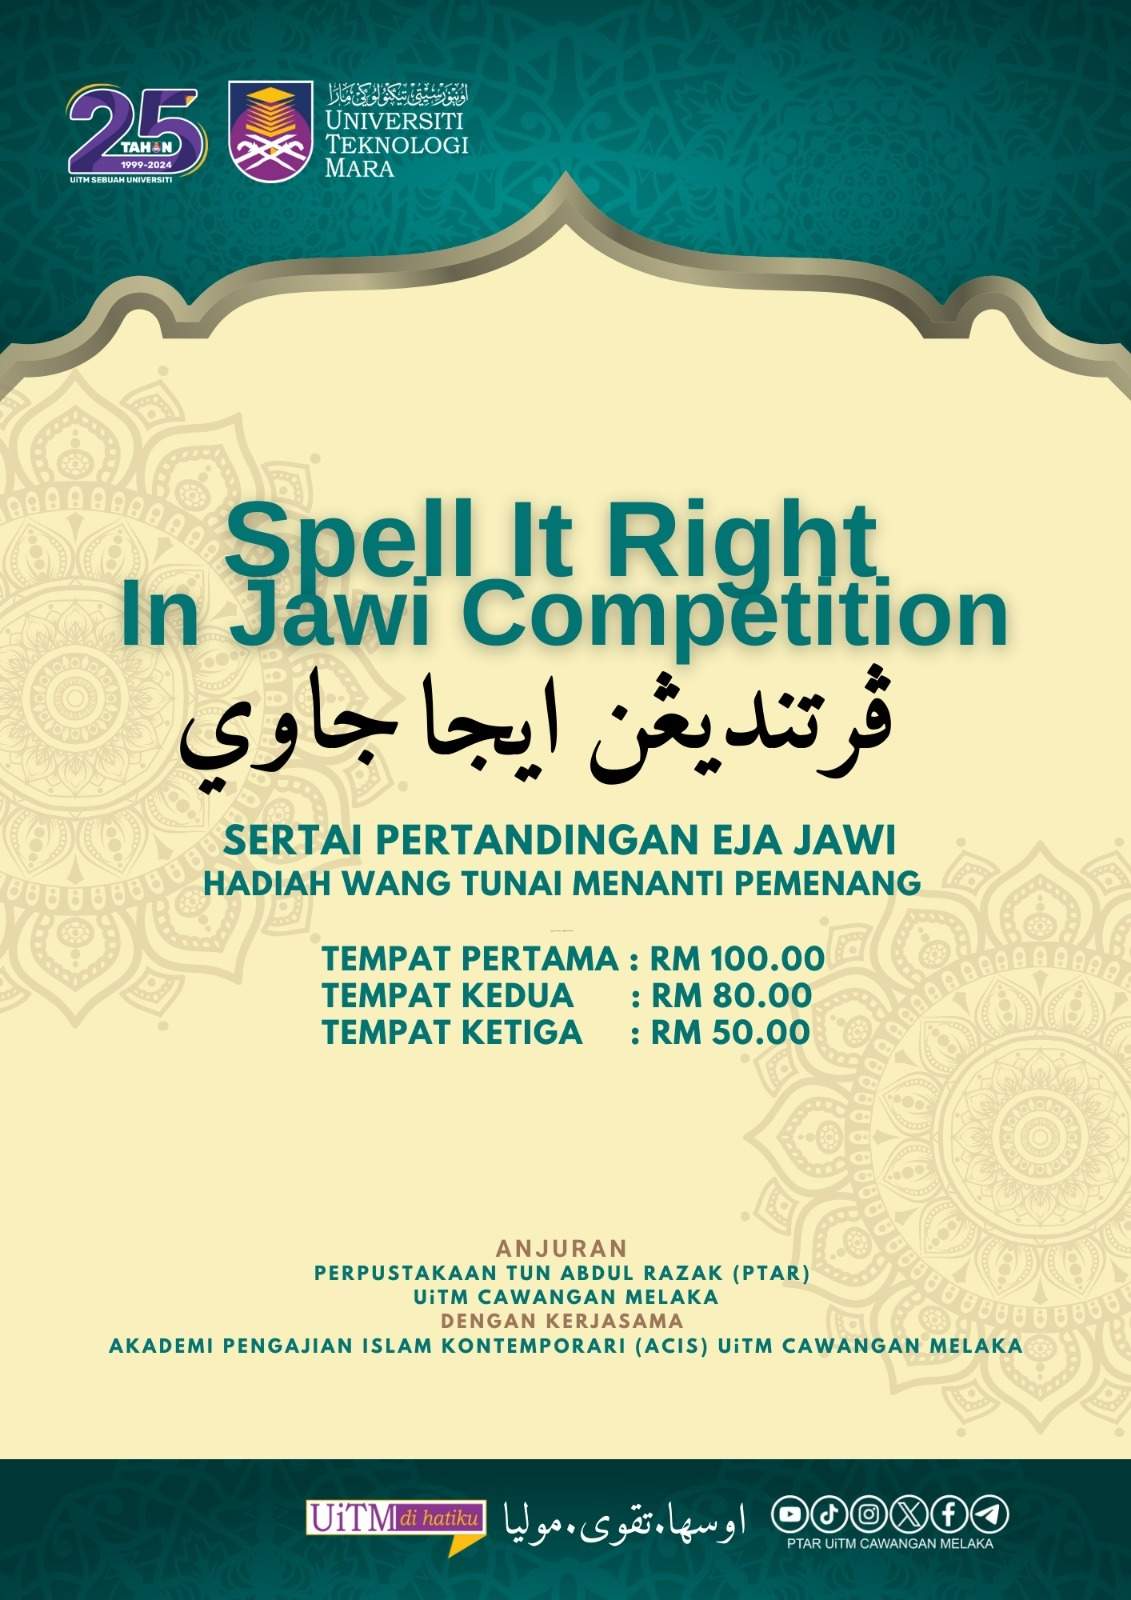 PERTANDINGAN “SPELL IT RIGHT IN JAWI”